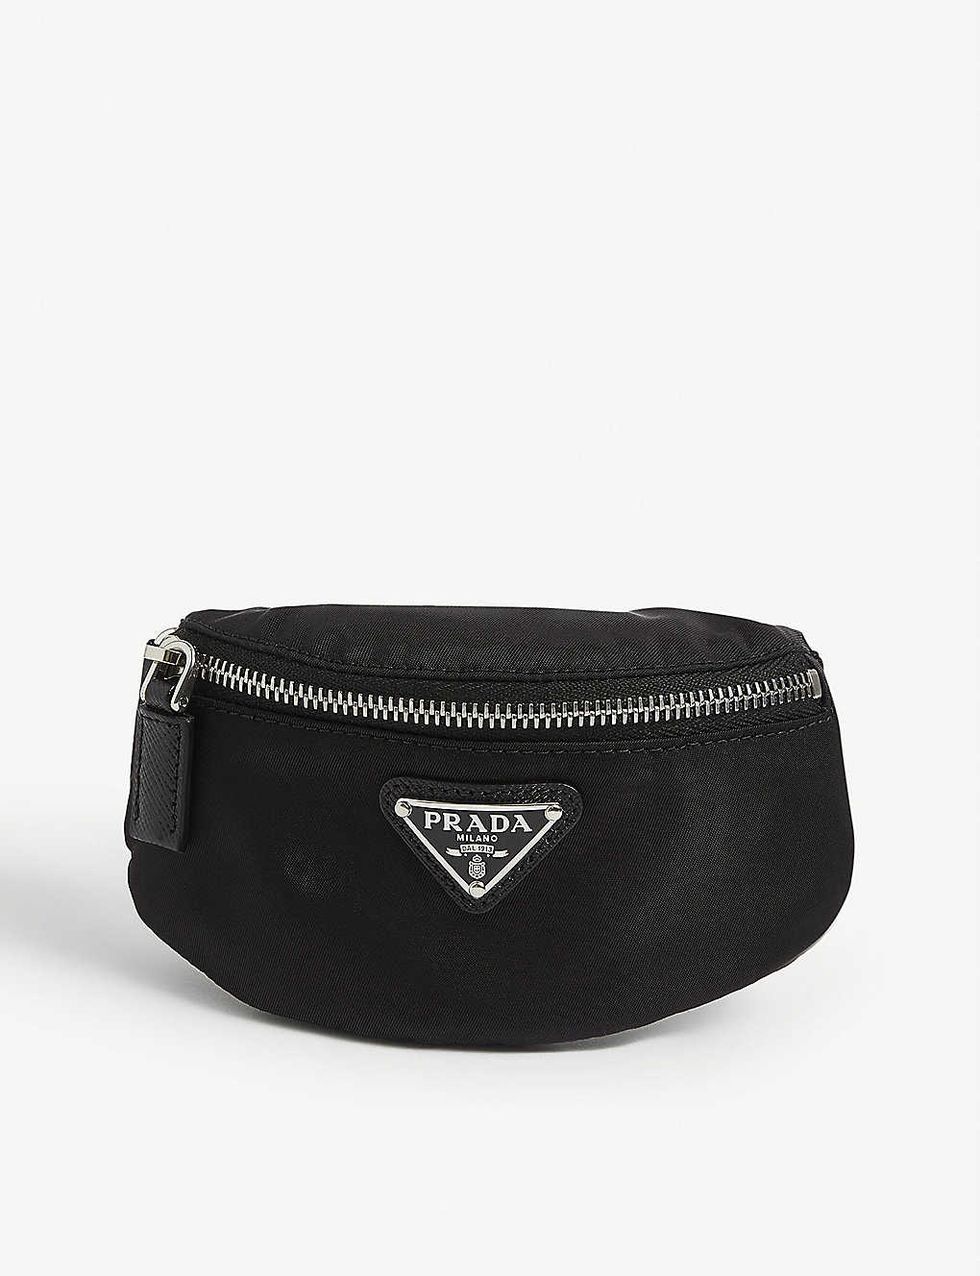 The Best Bumbags 2021- 19 Belt Bags To Buy